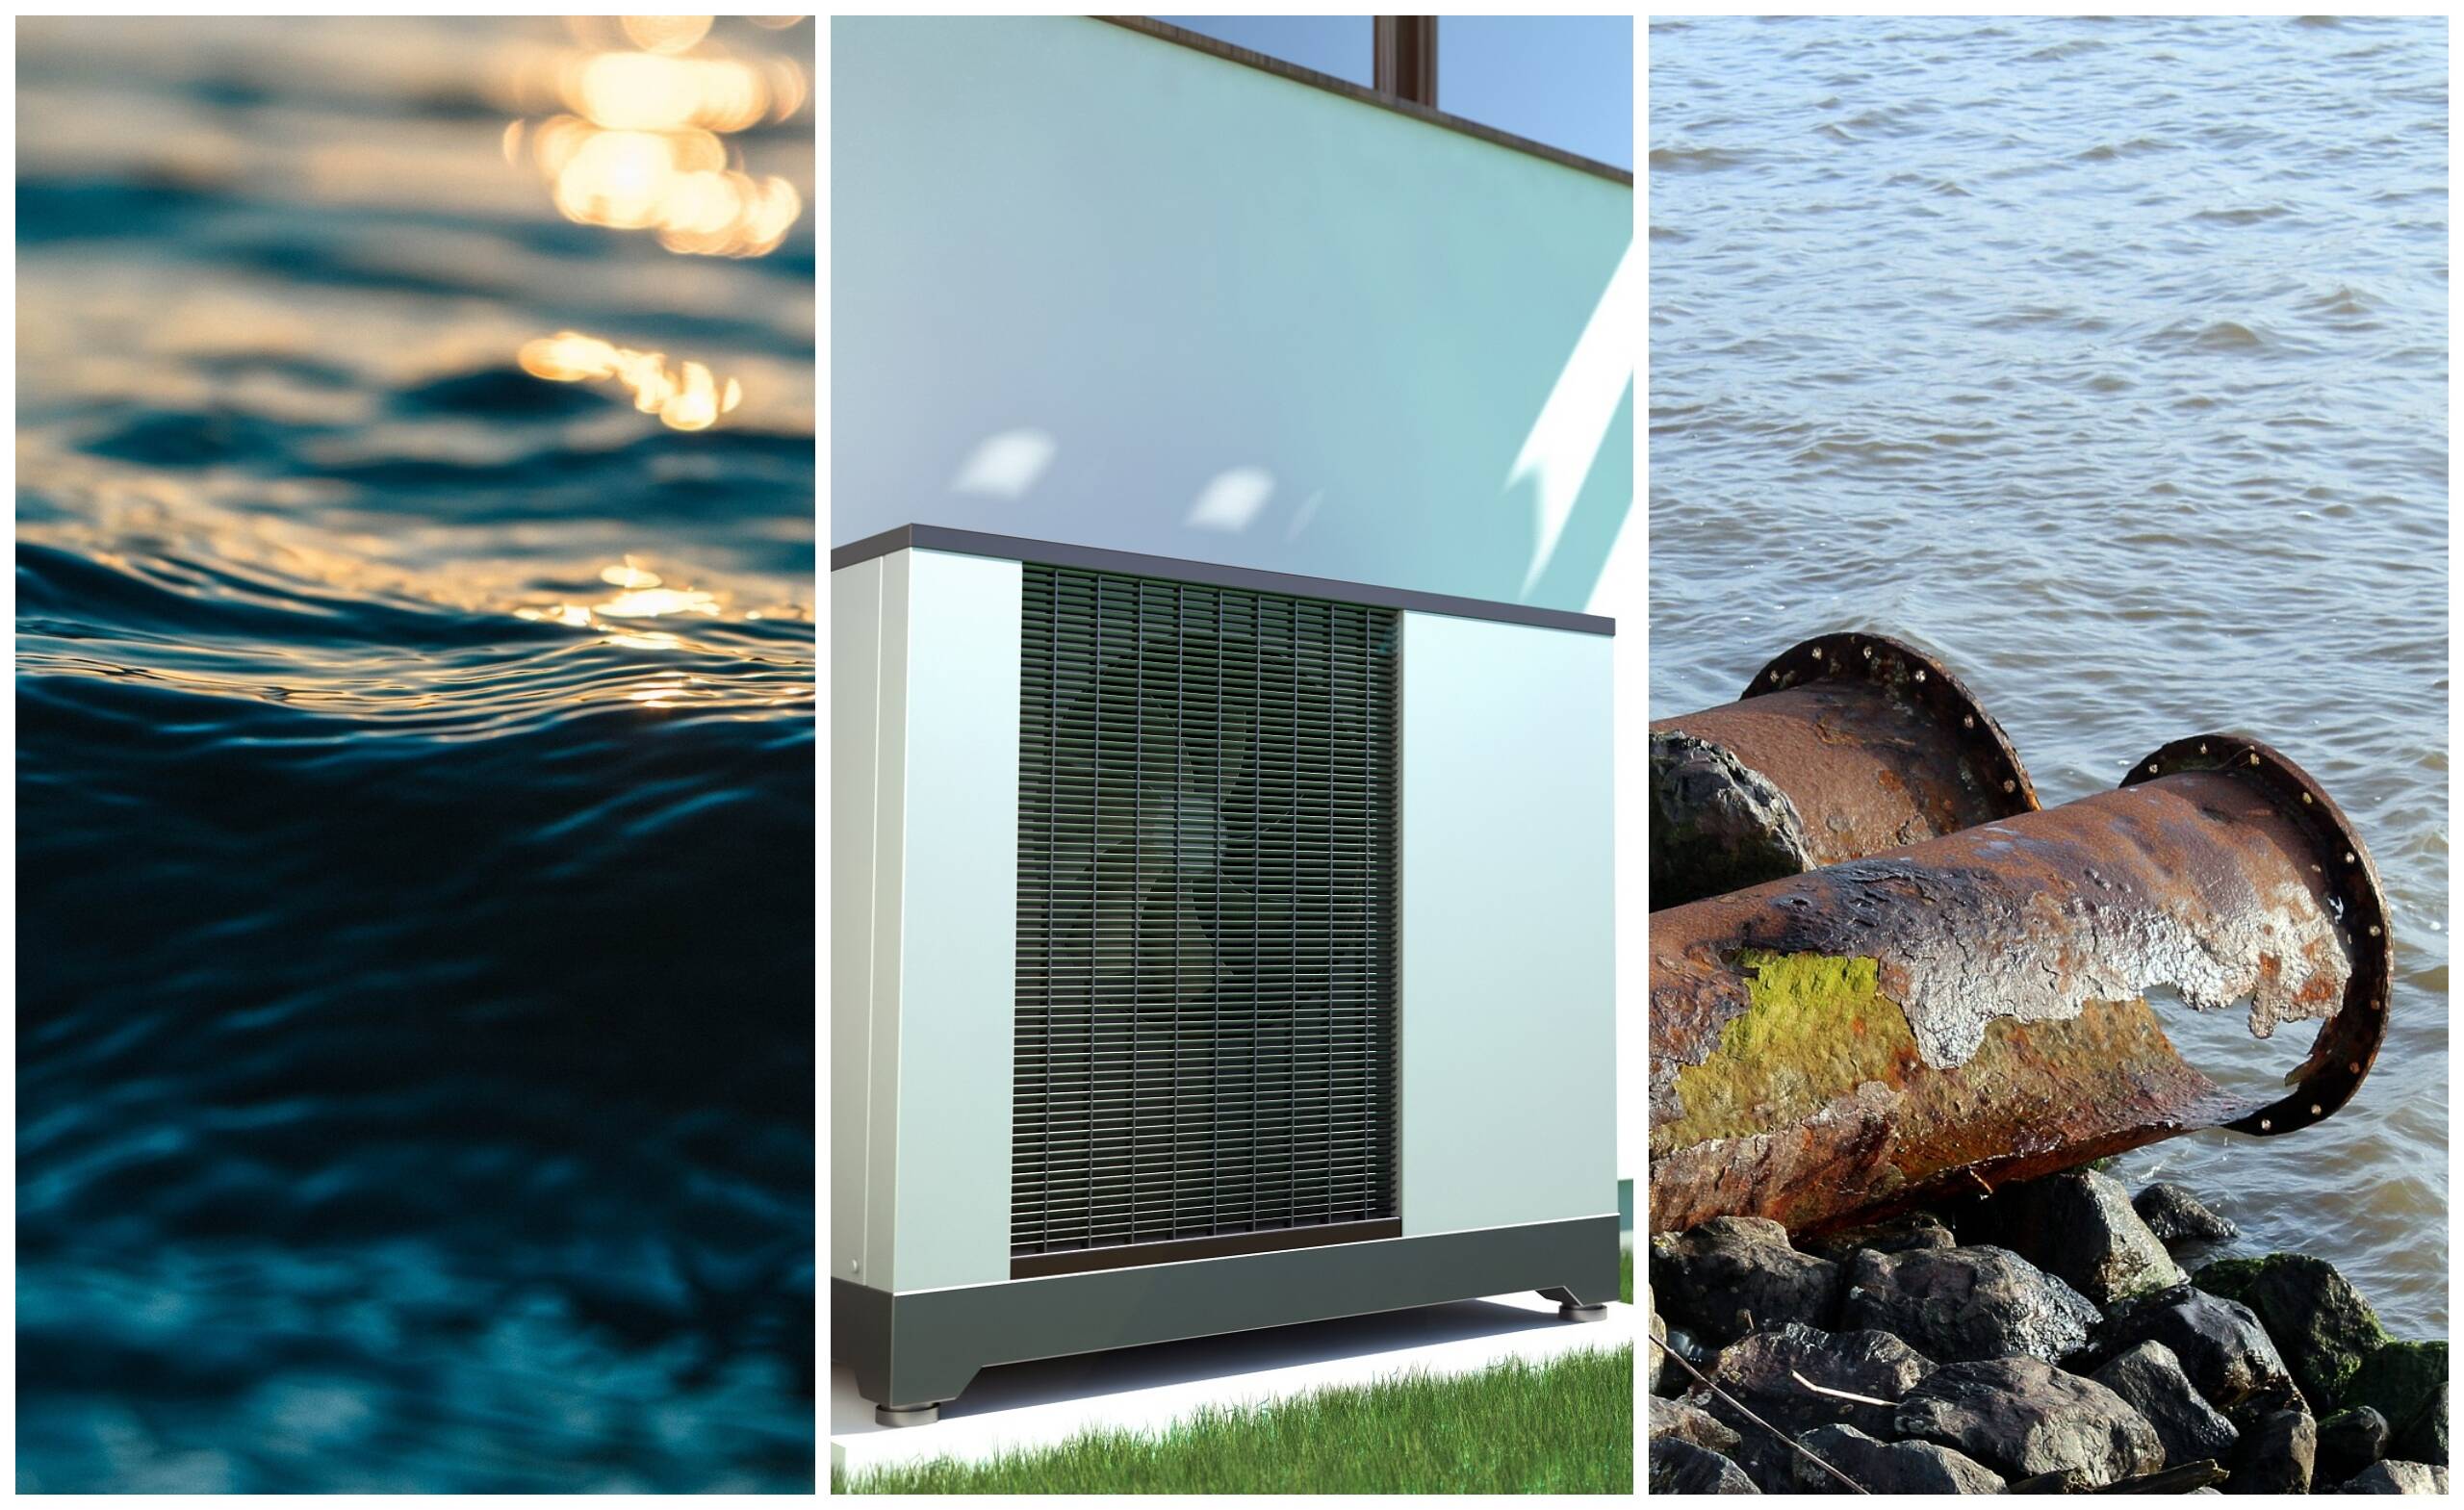 Innovation round-up: Anglian and Yorkshire invest in bathing water projects, WPD investigates heat pump flexibility